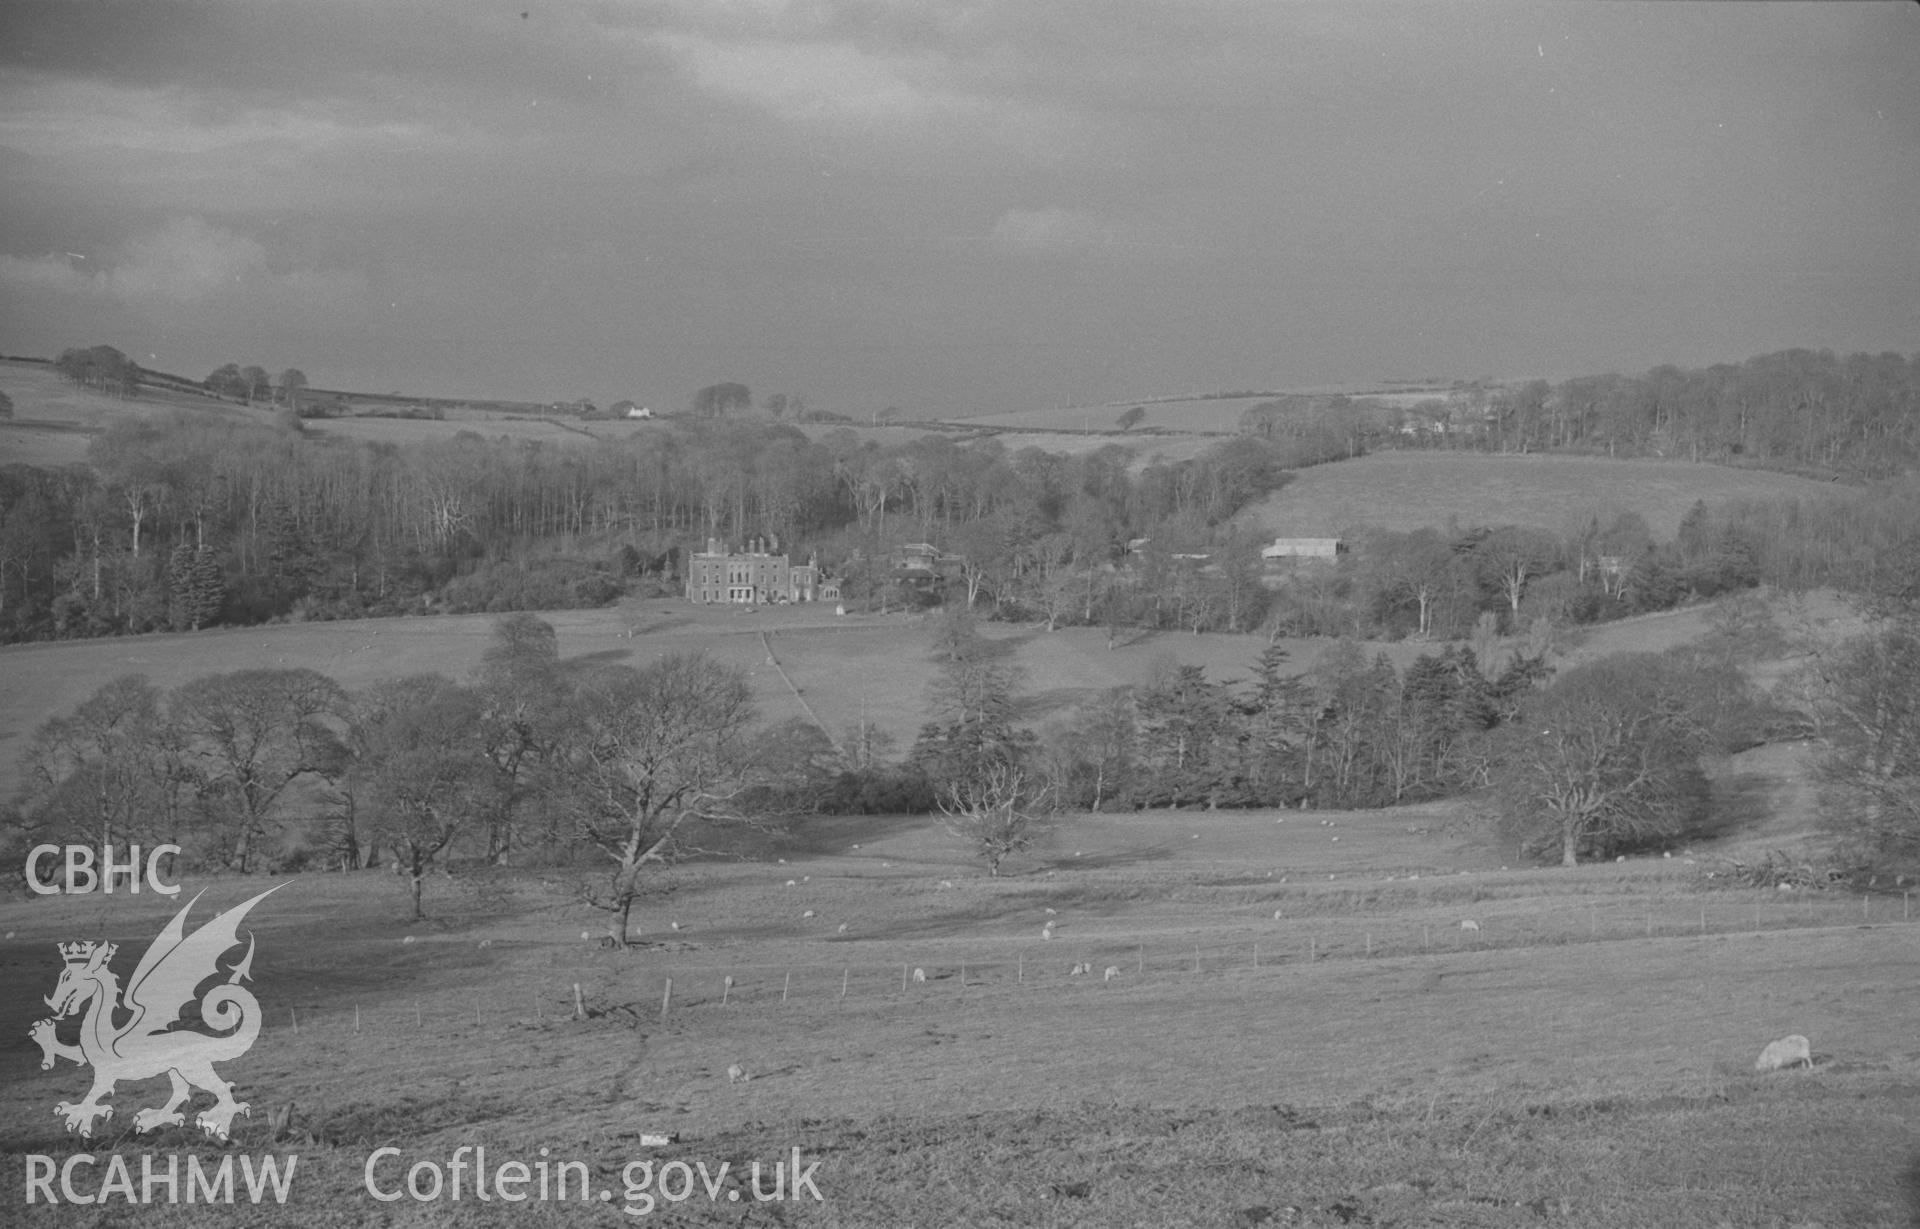 Digital copy of a black and white negative showing panorama of Nanteos estate from the New Cross Road. Photographed by Arthur O. Chater in January 1968. (Looking north from Grid Reference SN 620 779) [Photo 3 of 5].